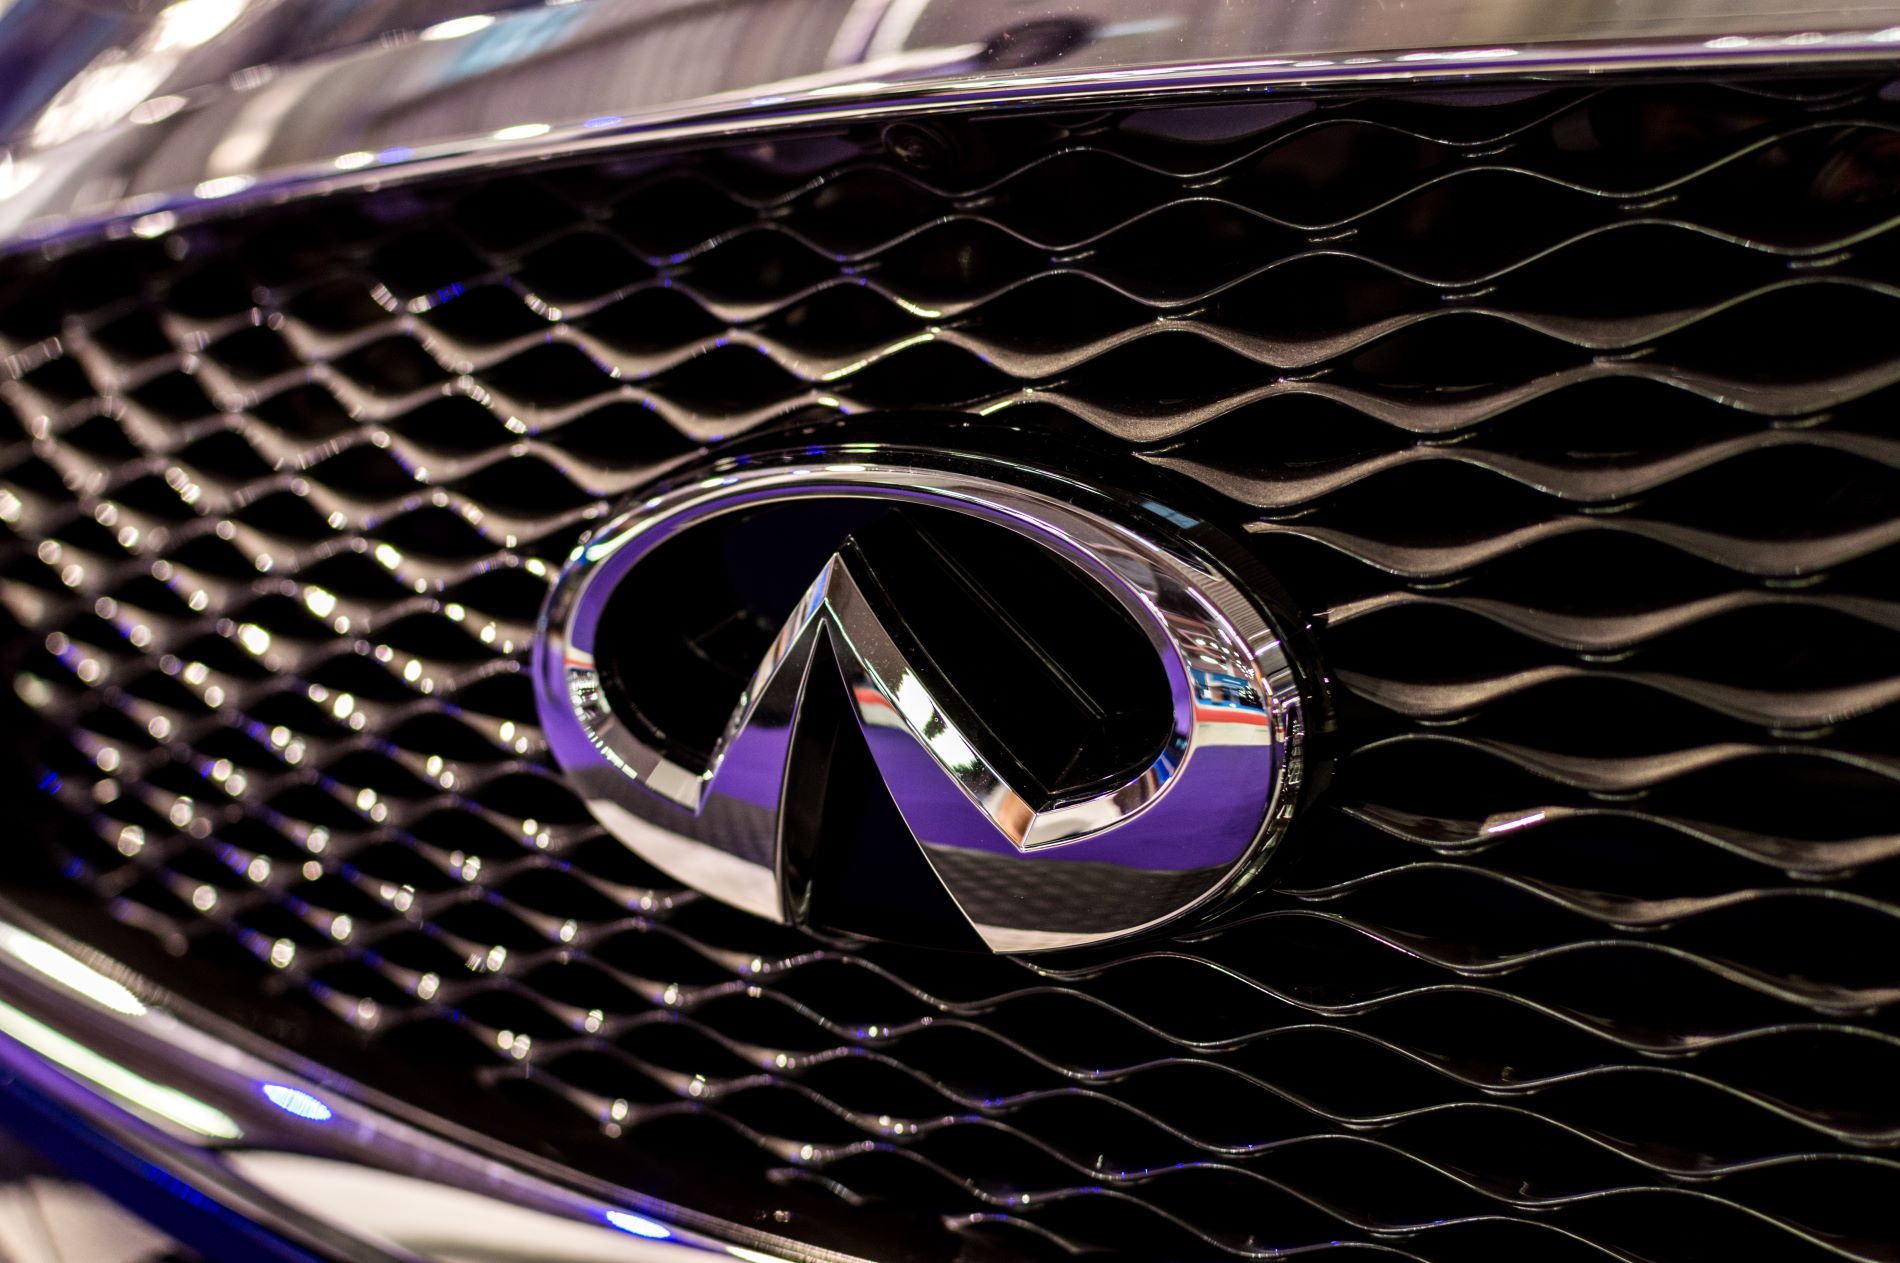 Who makes INFINITI vehicles, the INFINITI brand is famous for not only INFINITI SUV models but also INFINITI sedans.